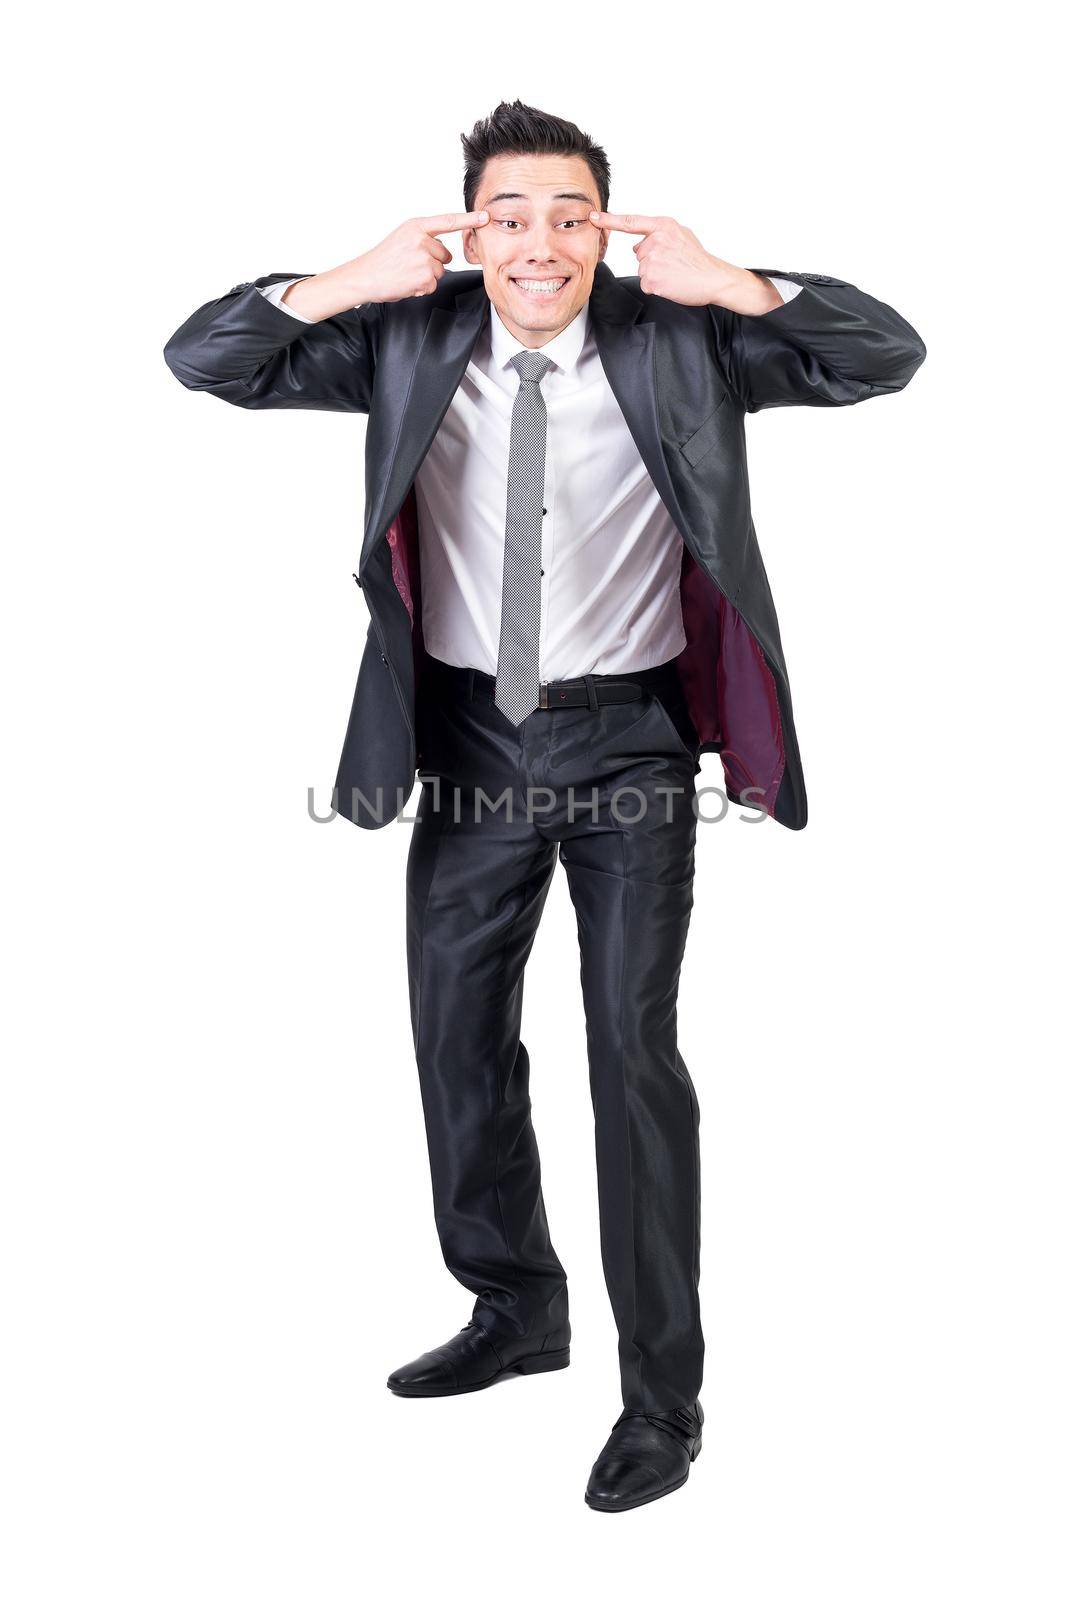 Full body of hilarious male entrepreneur in suit pretending being Asian and showing narrow eyes sign while having fun against white isolated background